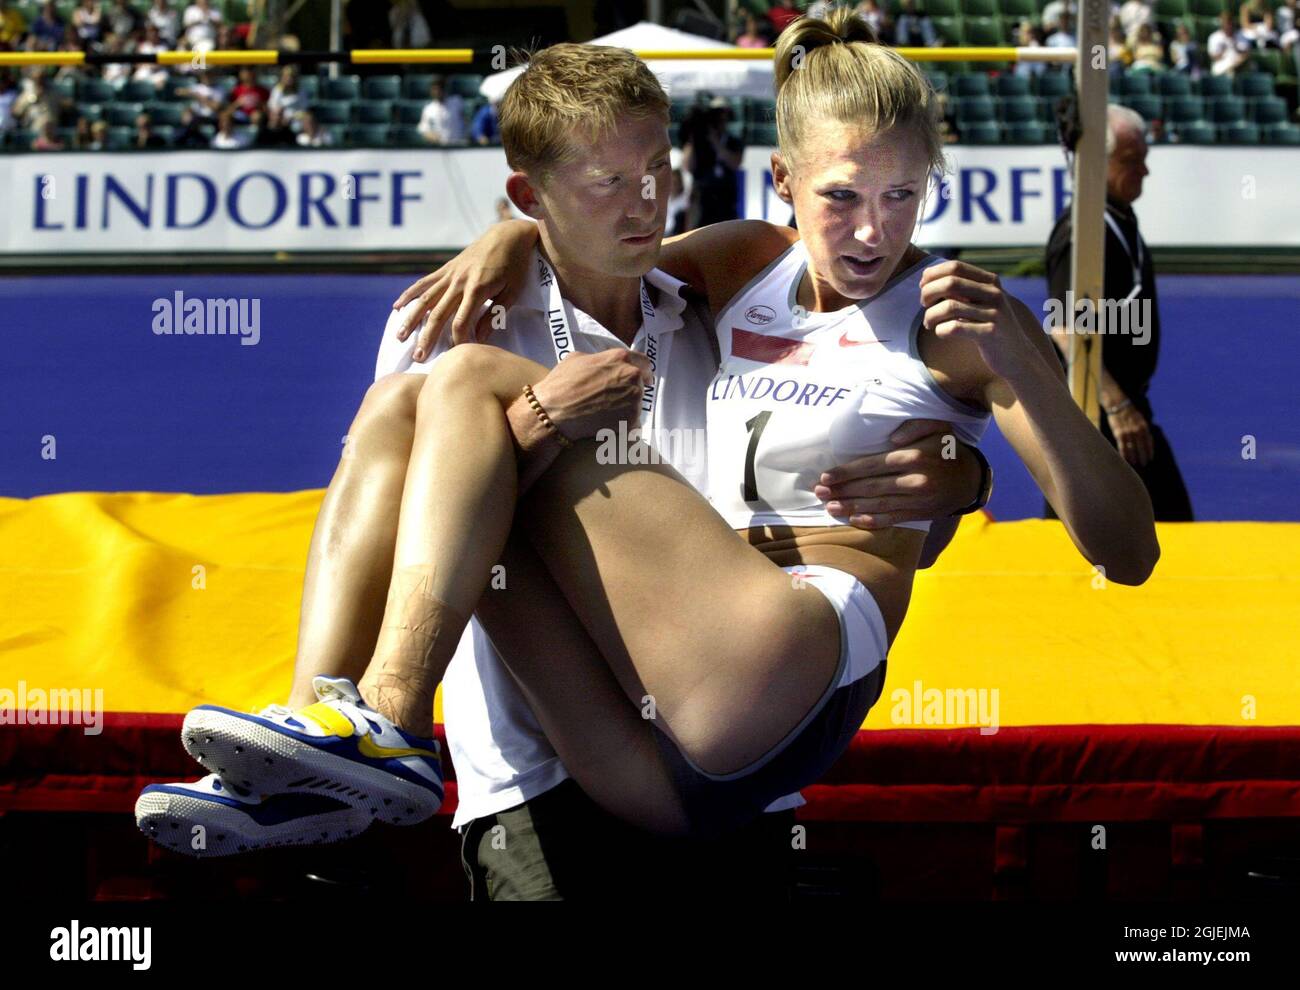 Swedish high jumper Kajsa Bergqvist is carried from the arena by her trainer Yannick Tregaro after her Achilles' tendon snapped. Bergqvist, who was a gold medal candidate for the Olympic Games will now miss the event. Stock Photo